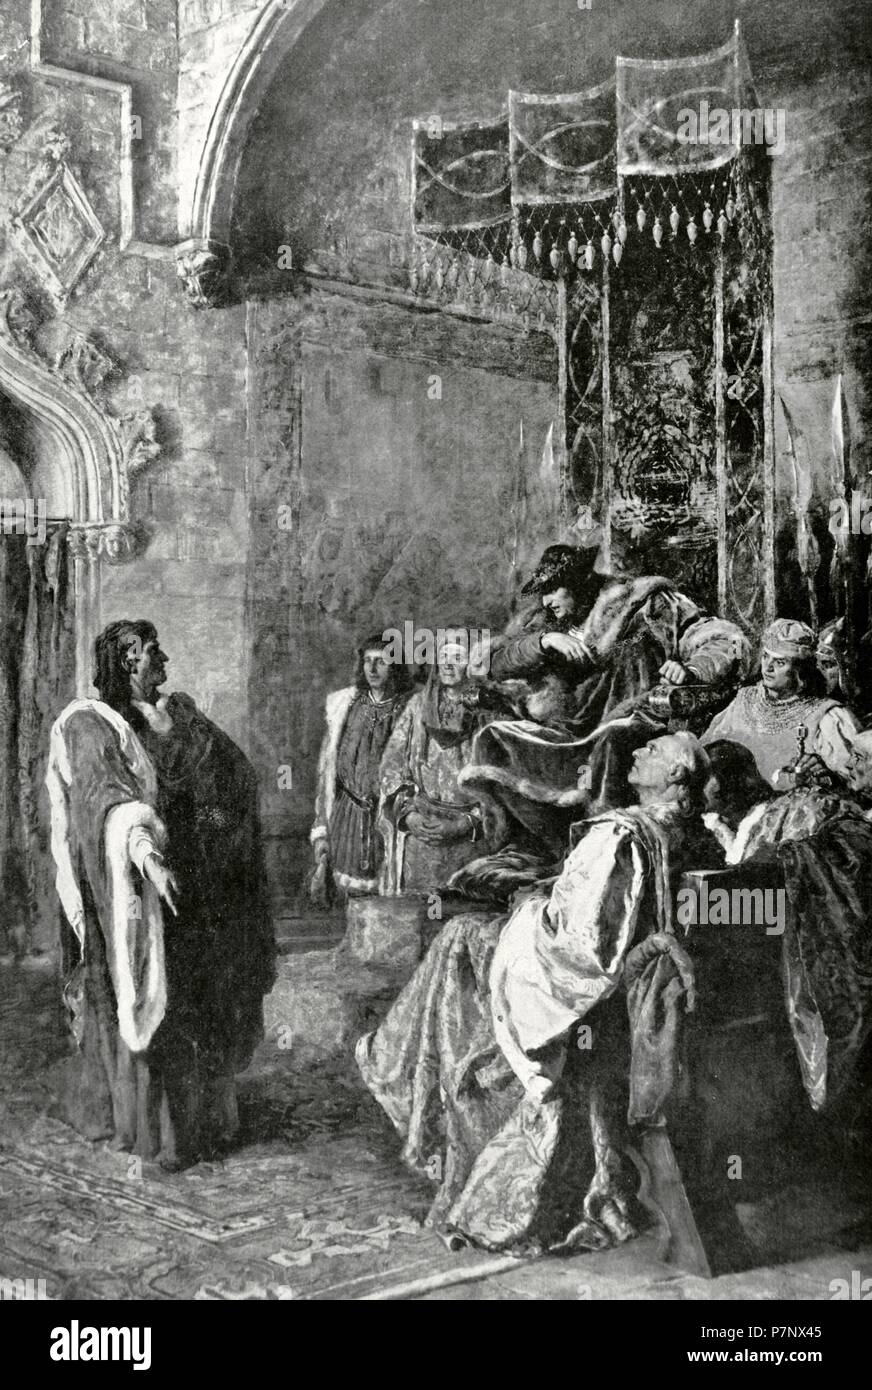 Joan Fiveller (14th century-1434). Member more representative of the urban oligarchy of Barcelona. Counselor of Barcelona. Fivaller defending the rights of the city before King Ferdinand and her court. Engraving of the Catalan Illustration after a painting by Ramon Tusquets, 1904. Stock Photo